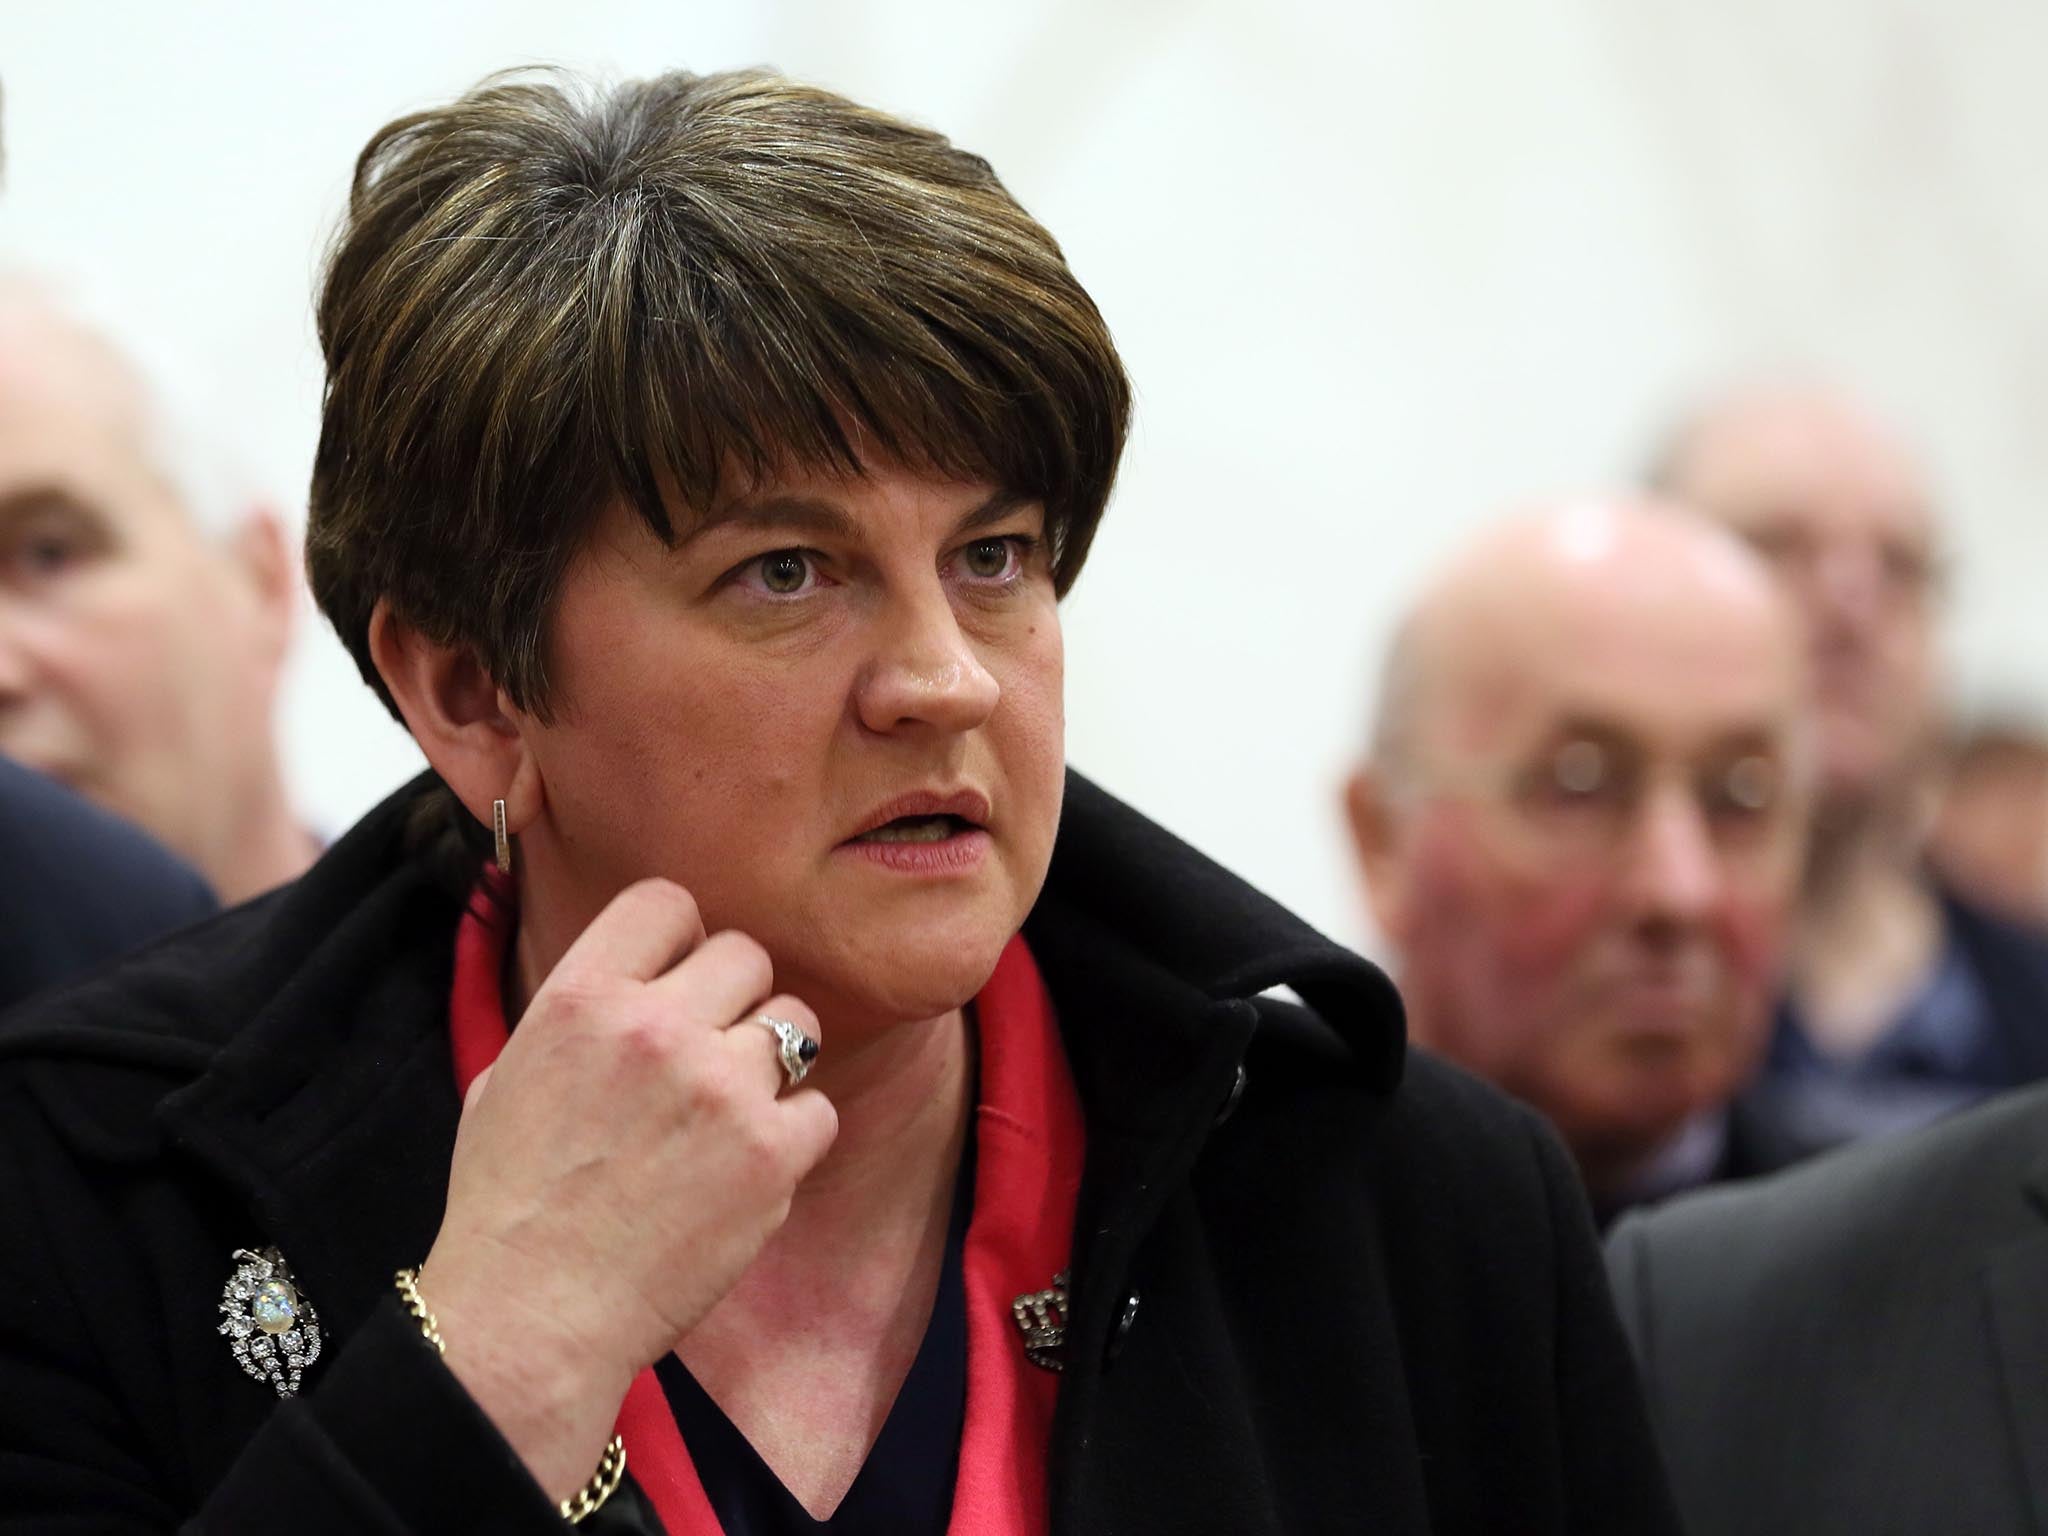 The sensible thing for the DUP to do now would be to have their leader and former First Minister, Arlene Foster, stand aside while the official inquiry into the scandal of a misbegotten energy scheme is completed